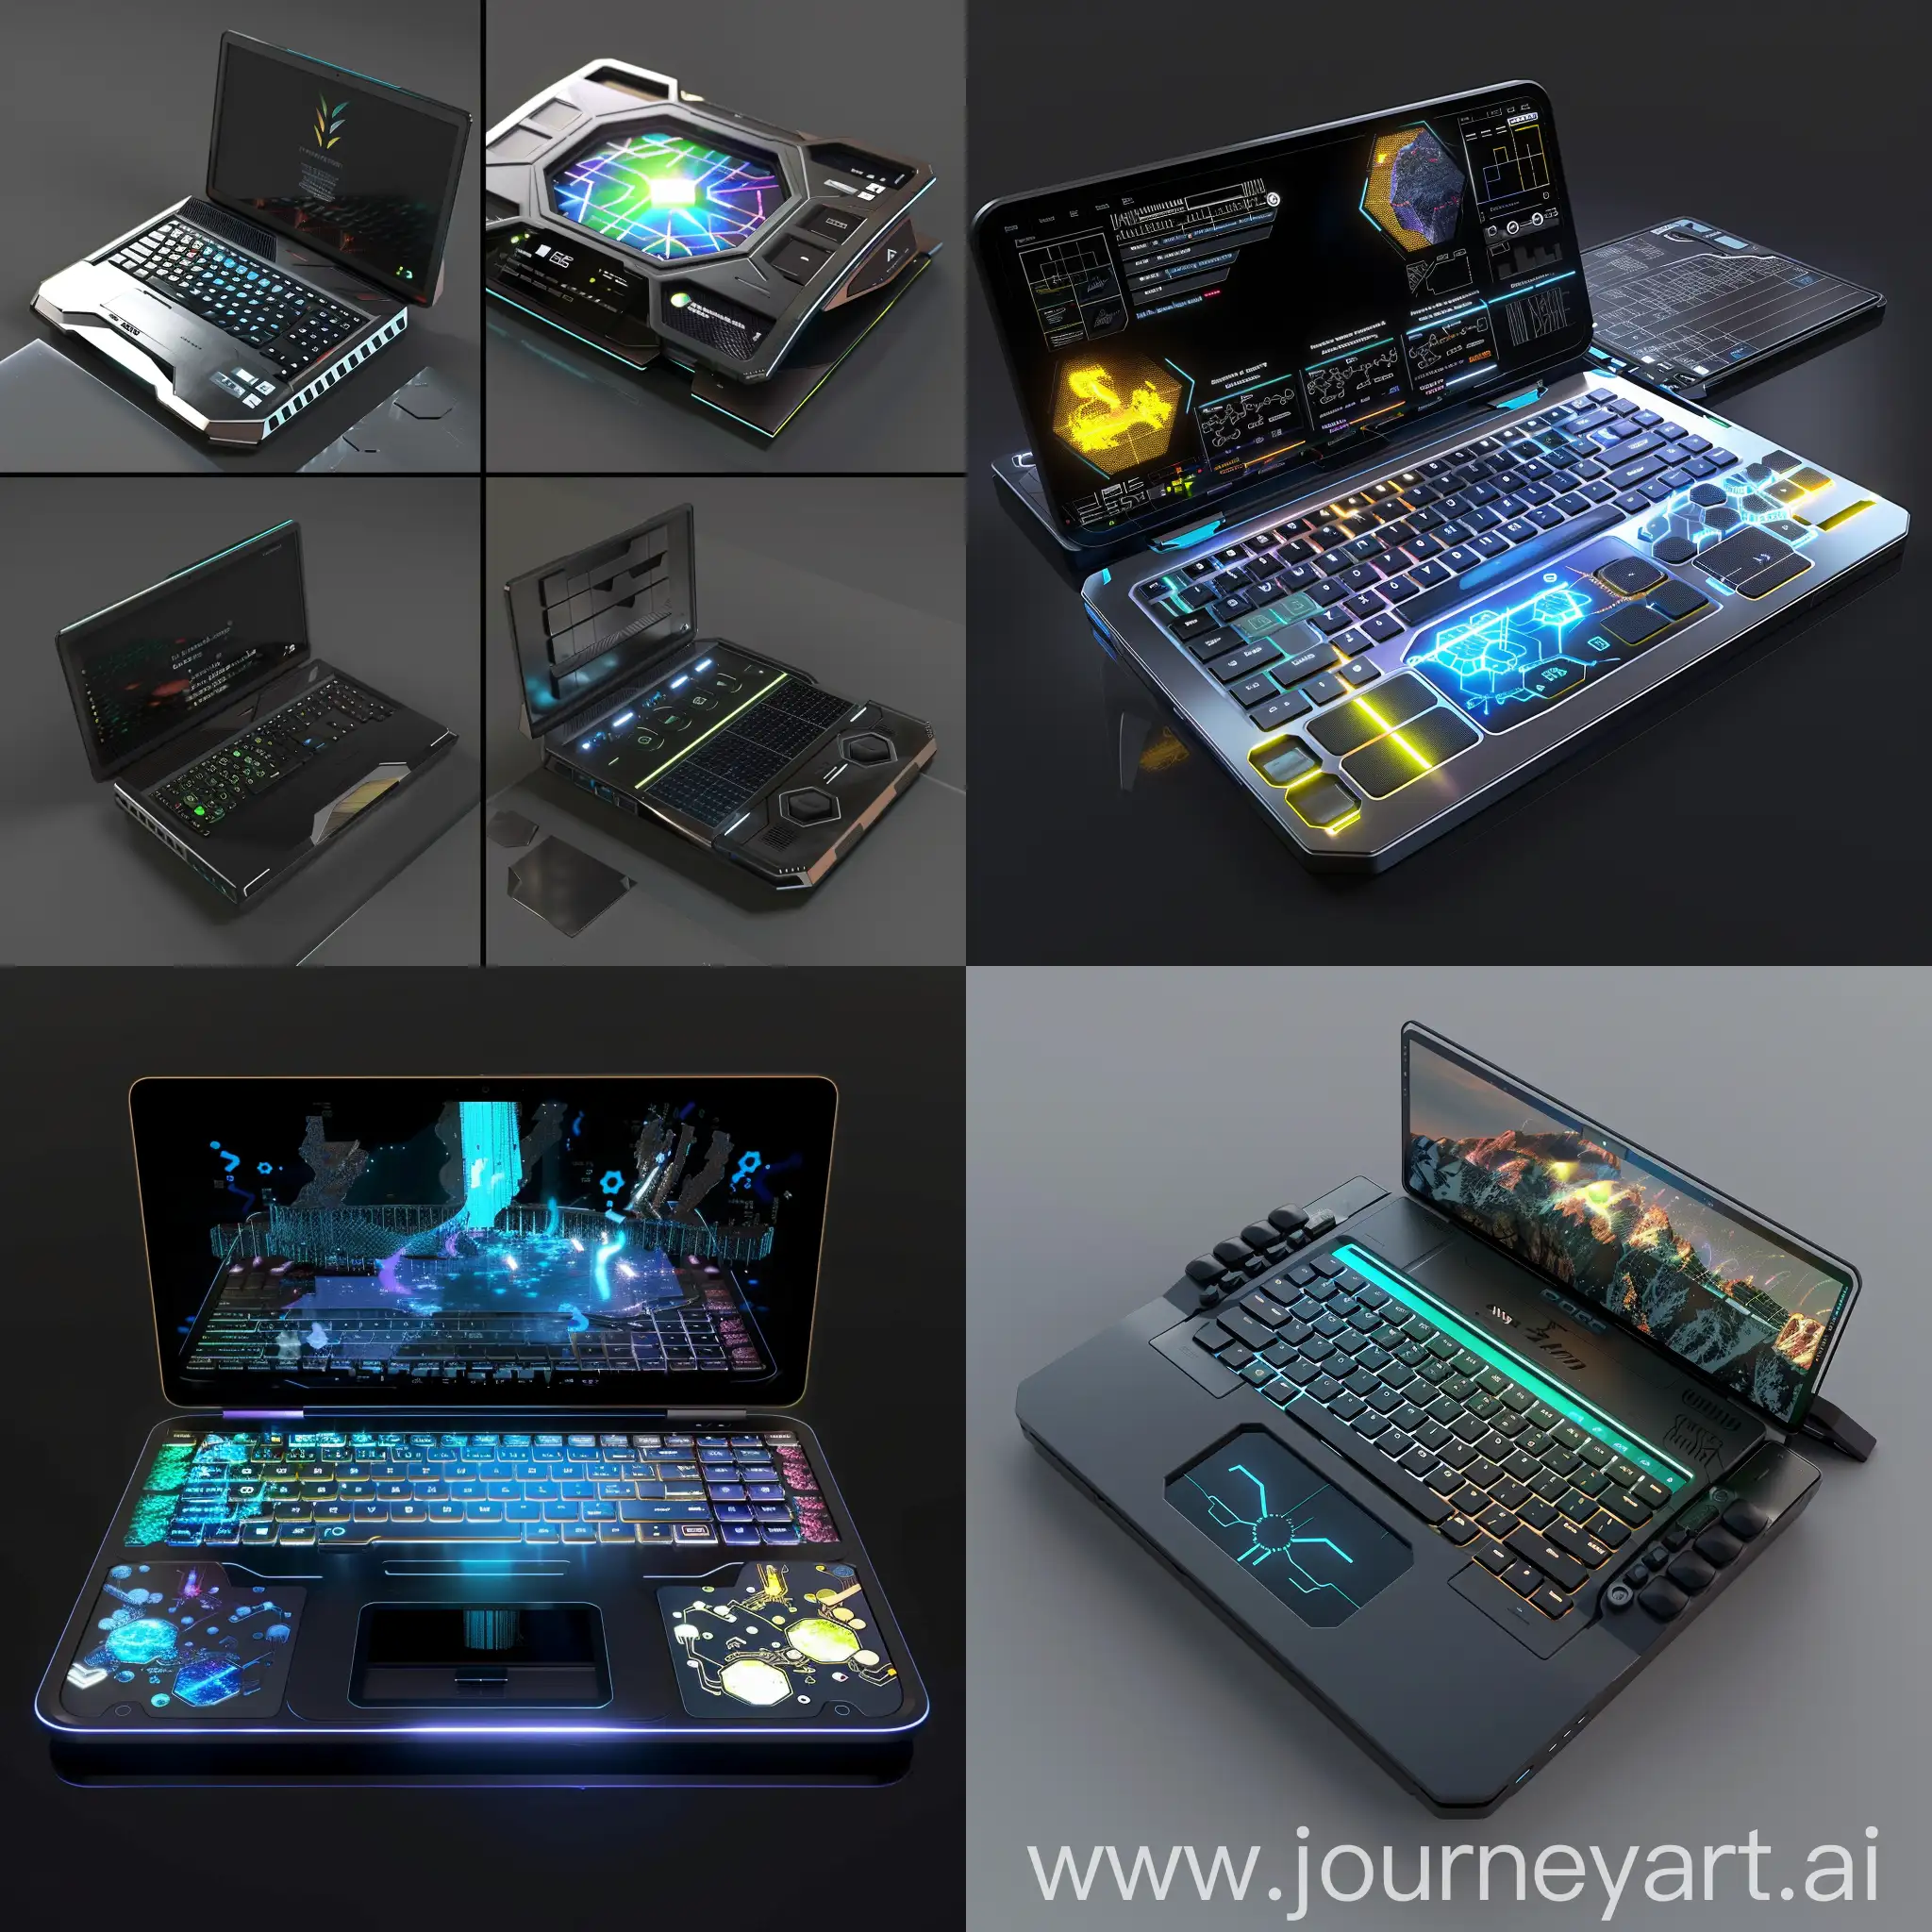 Futuristic-Laptop-with-BioIntegrated-Processors-and-SelfHealing-Components